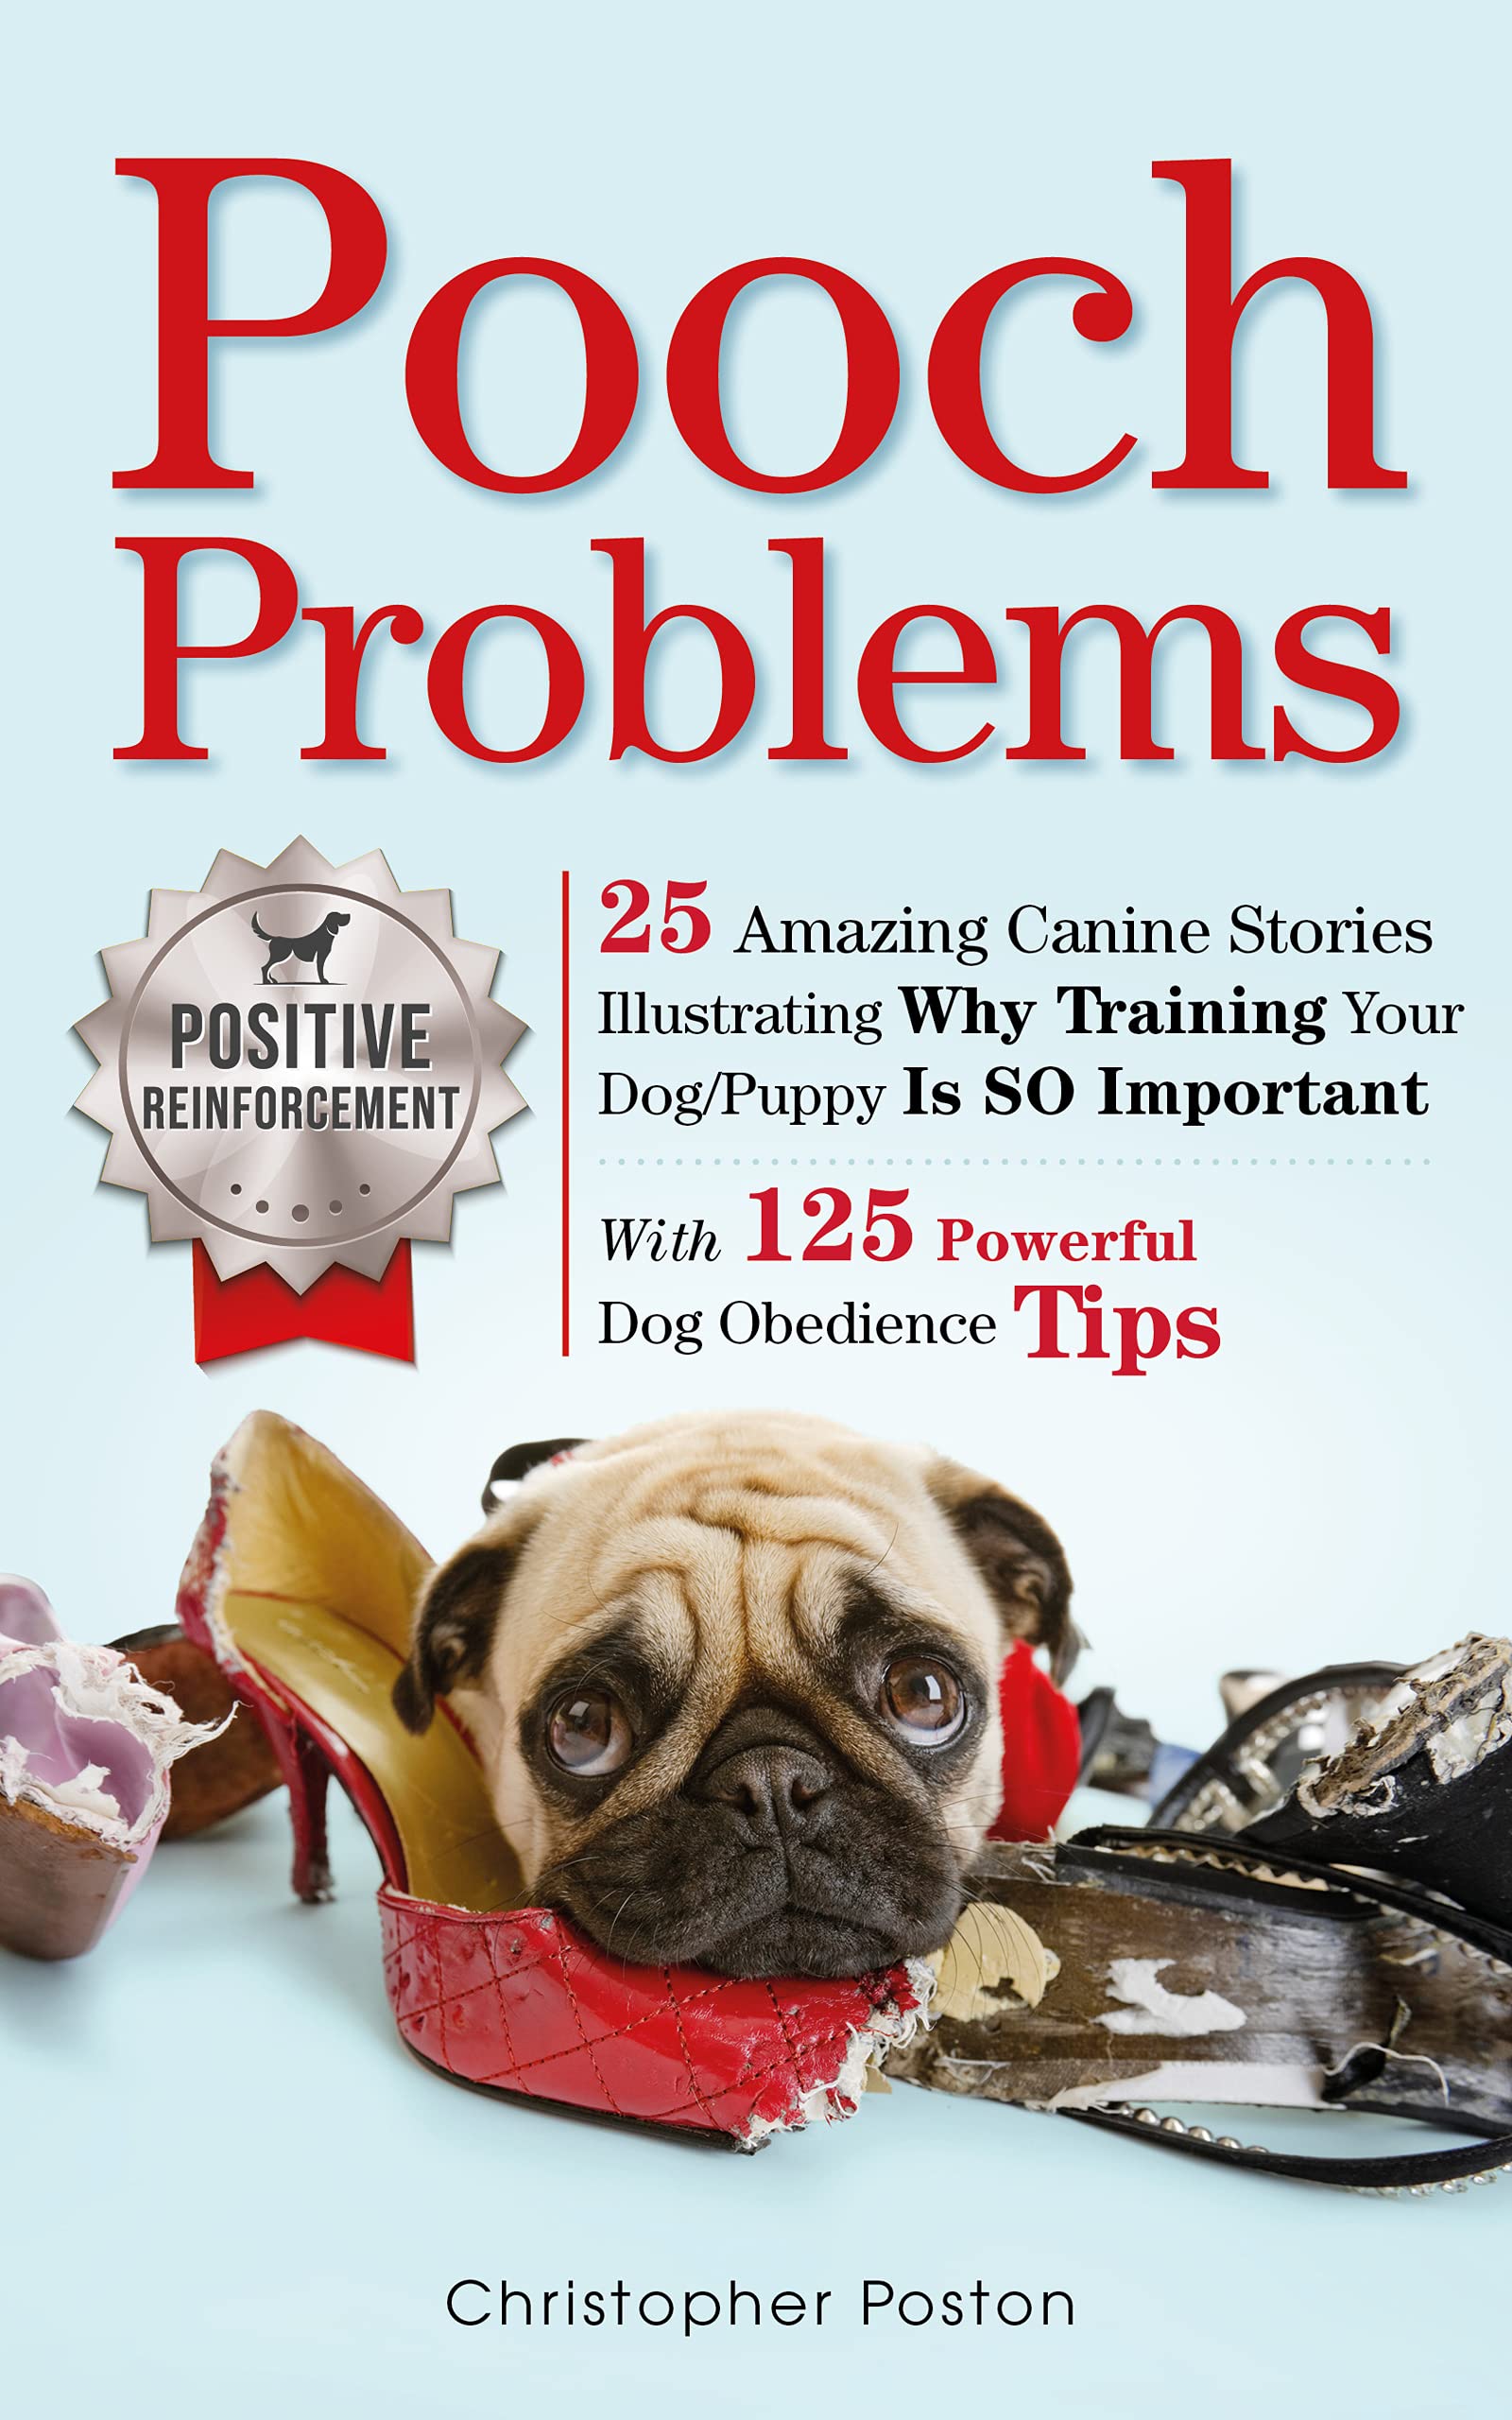 Pooch Problems by Christopher Poston